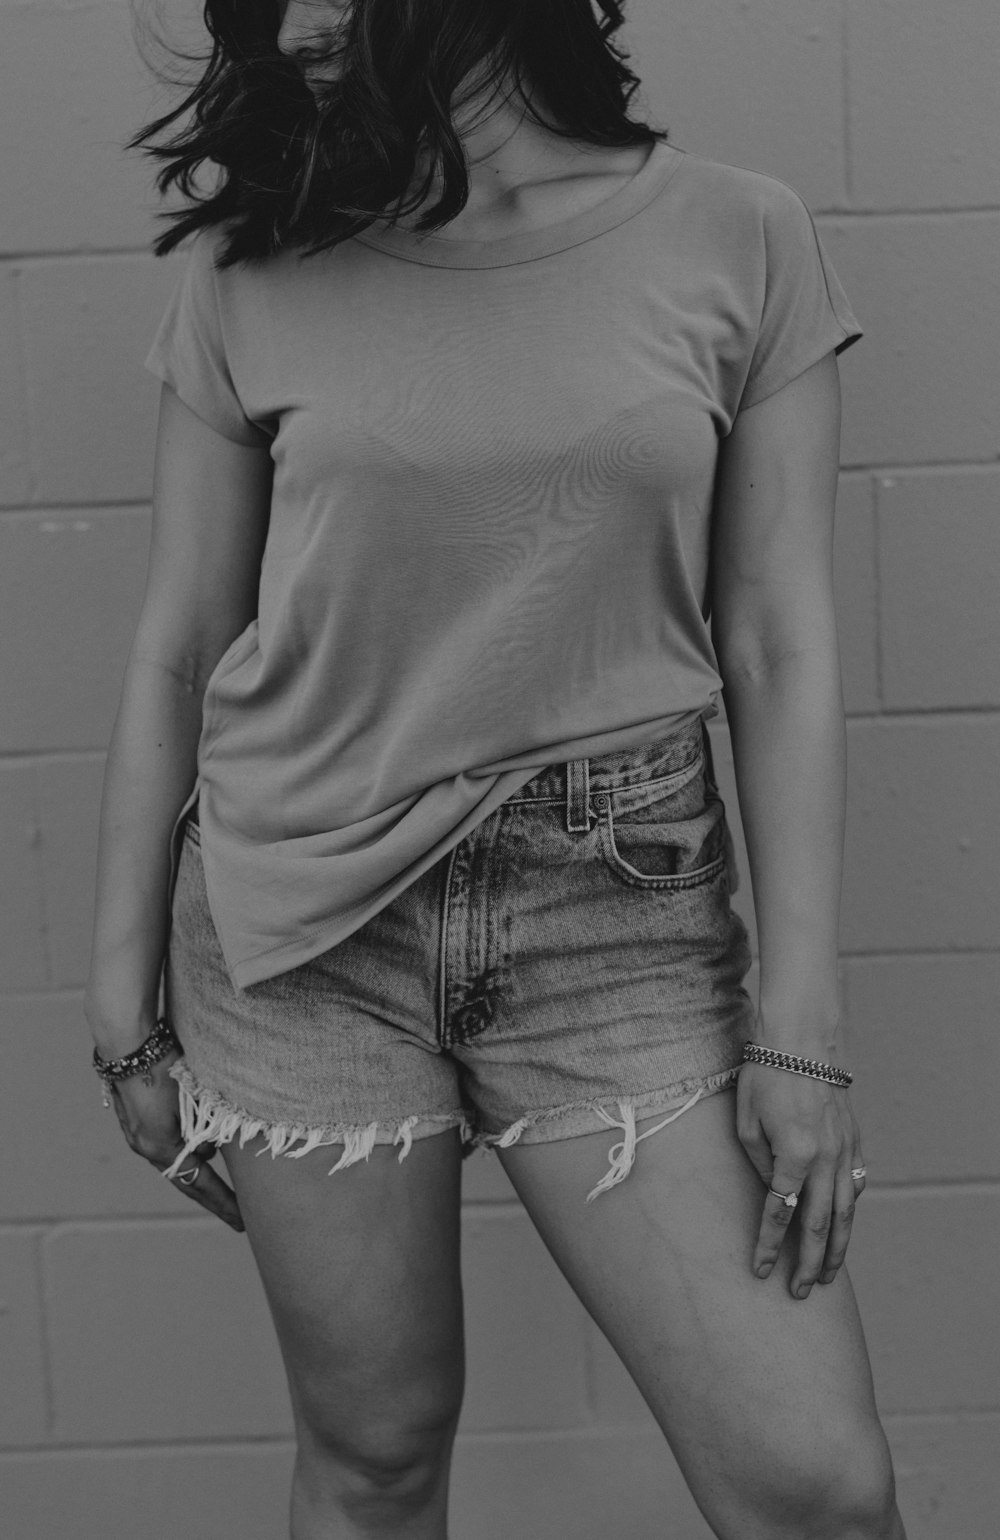 grayscale photography of woman wearing t-shirt and denim short shorts